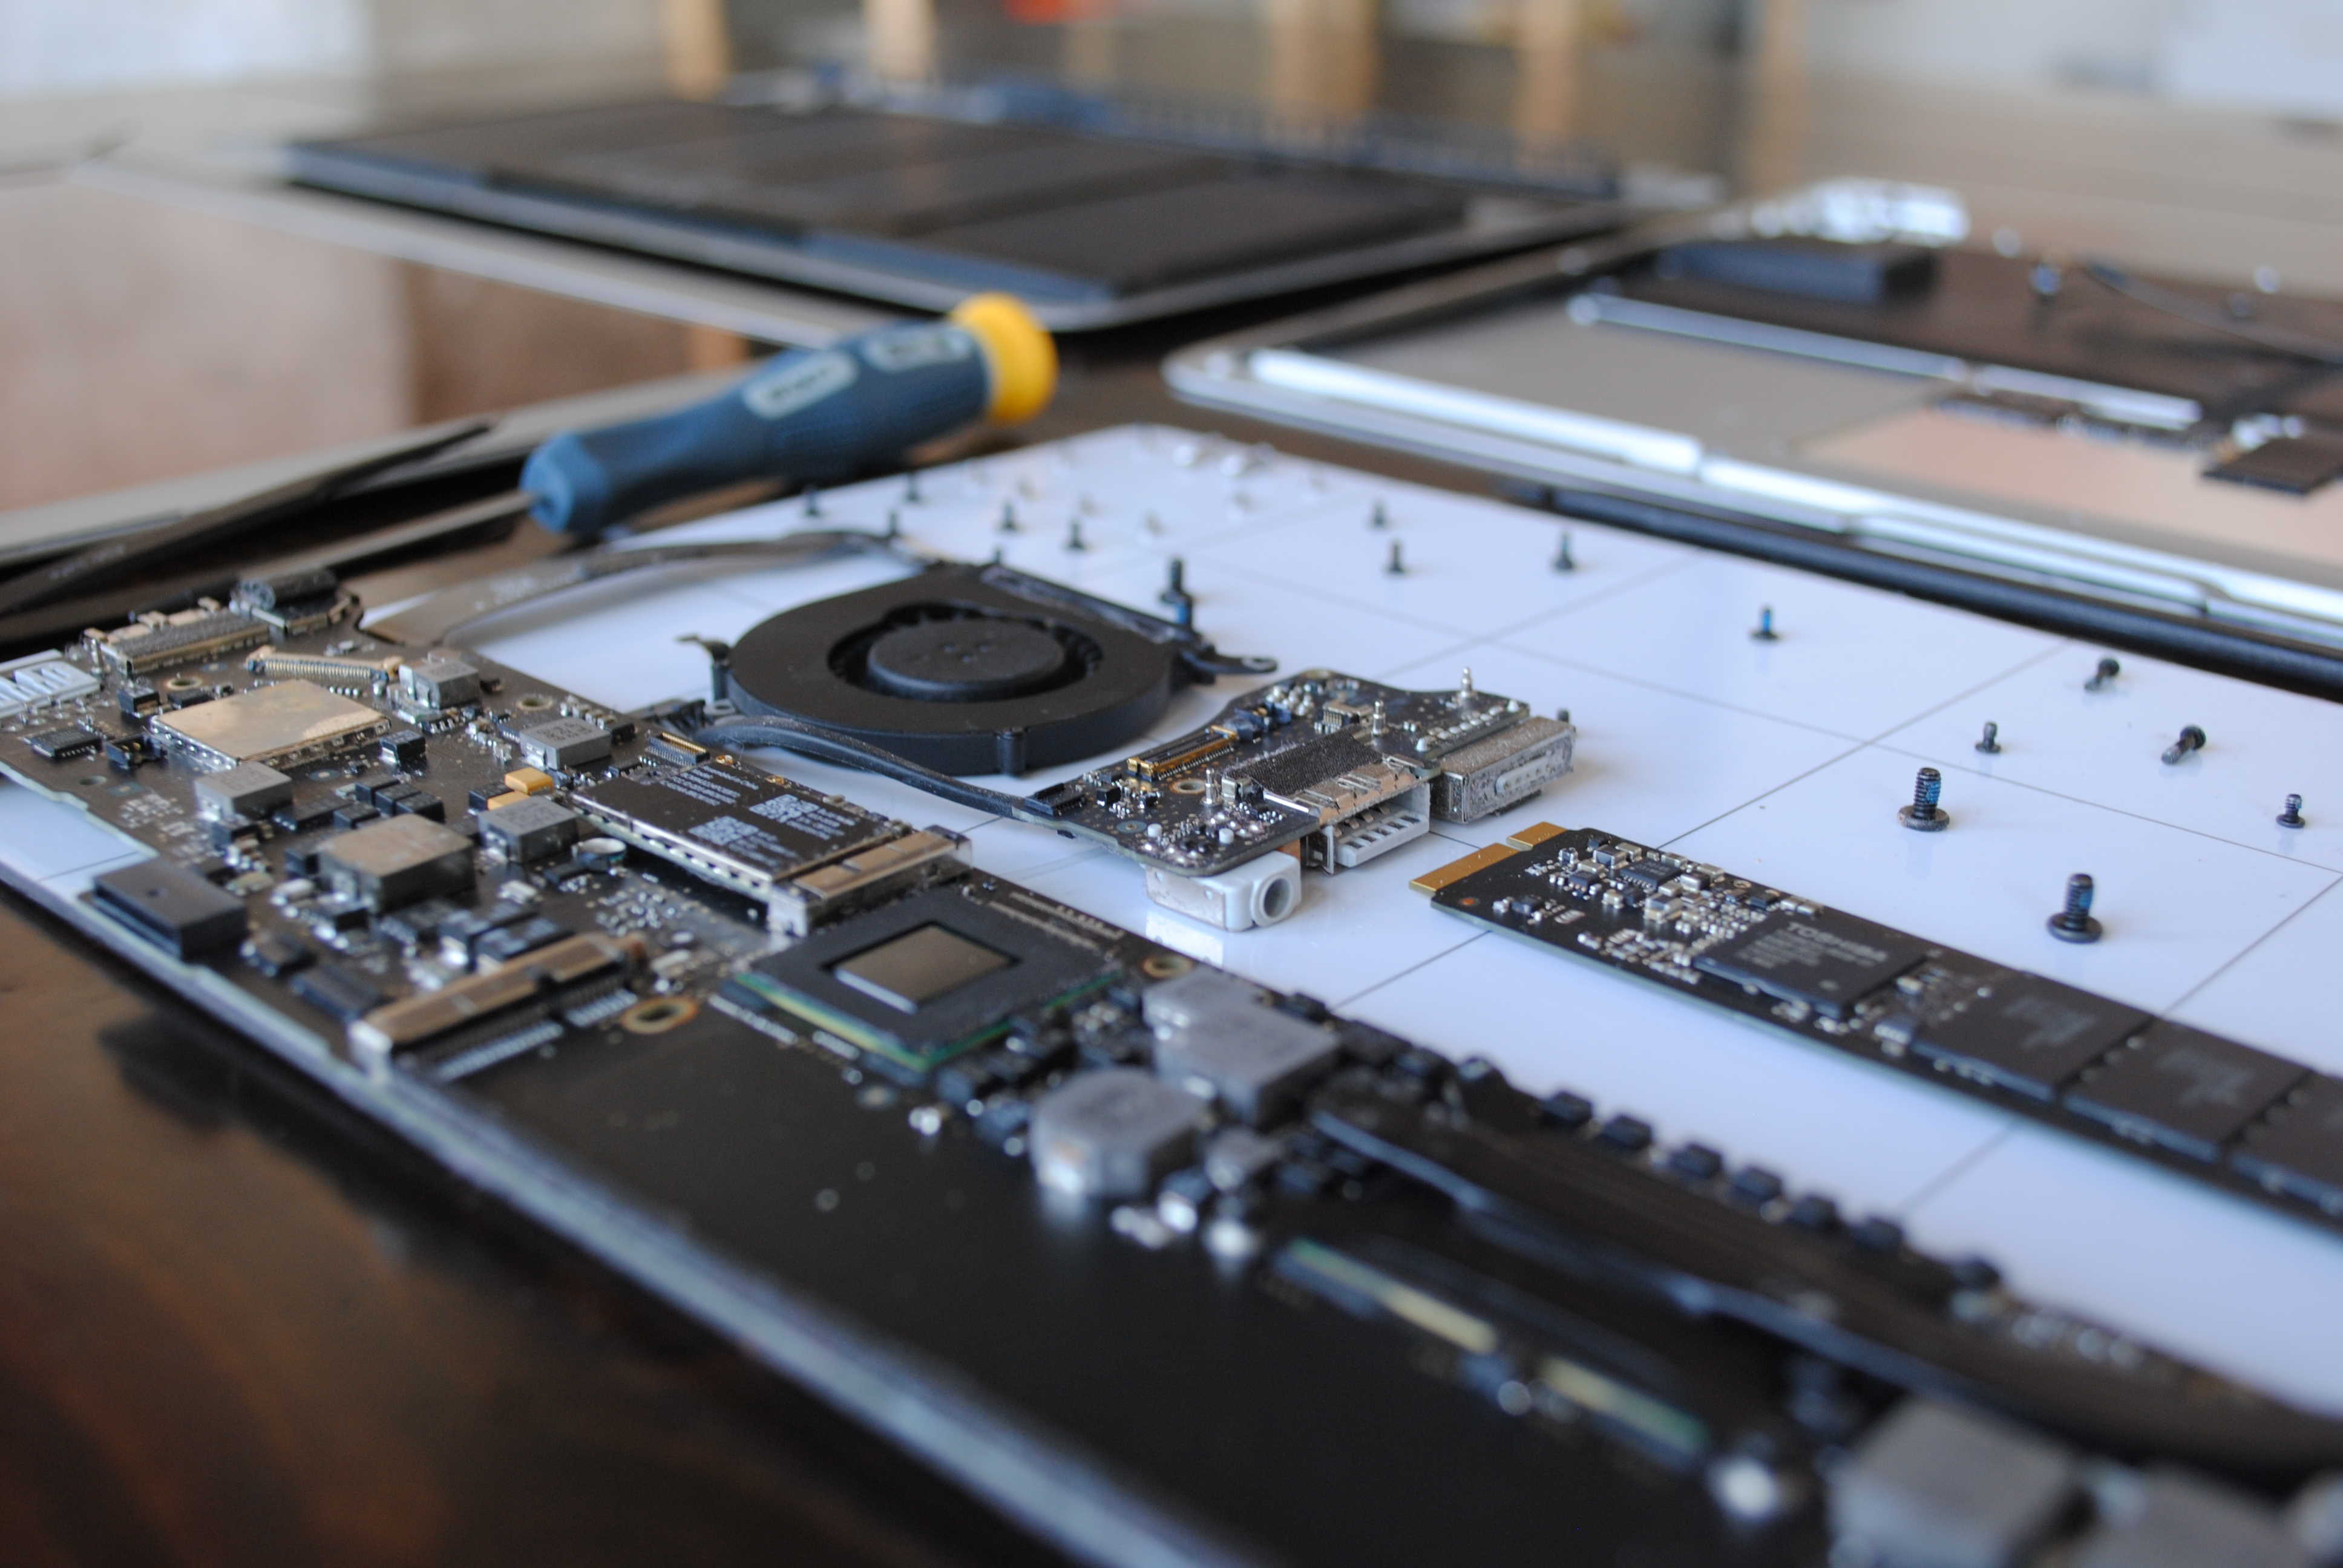 Even a broken MacBook is worth something -- if you take the right steps and find the right buyback program.